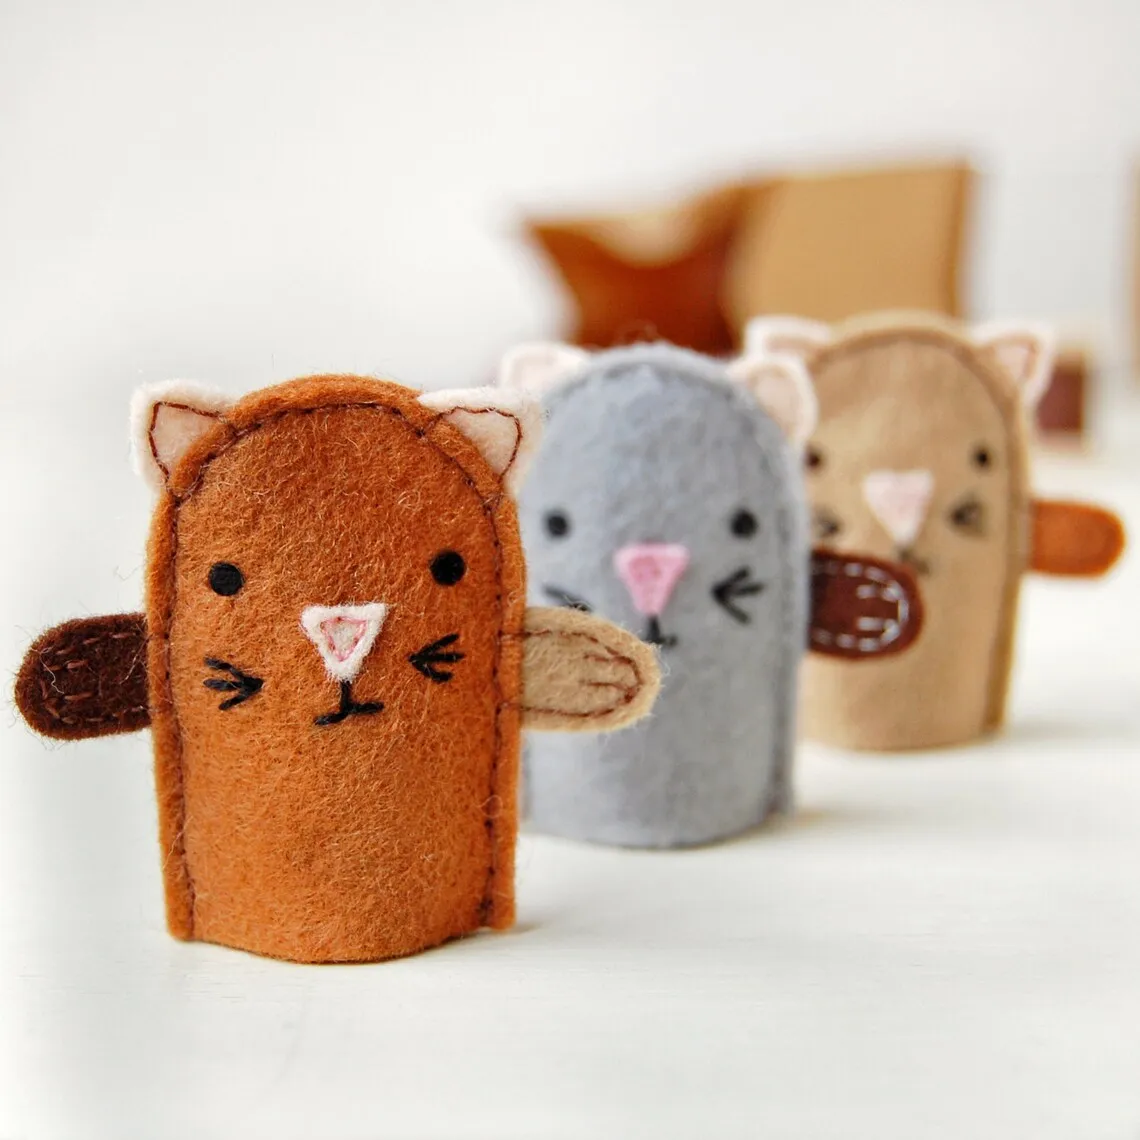 3 sewn finger puppets